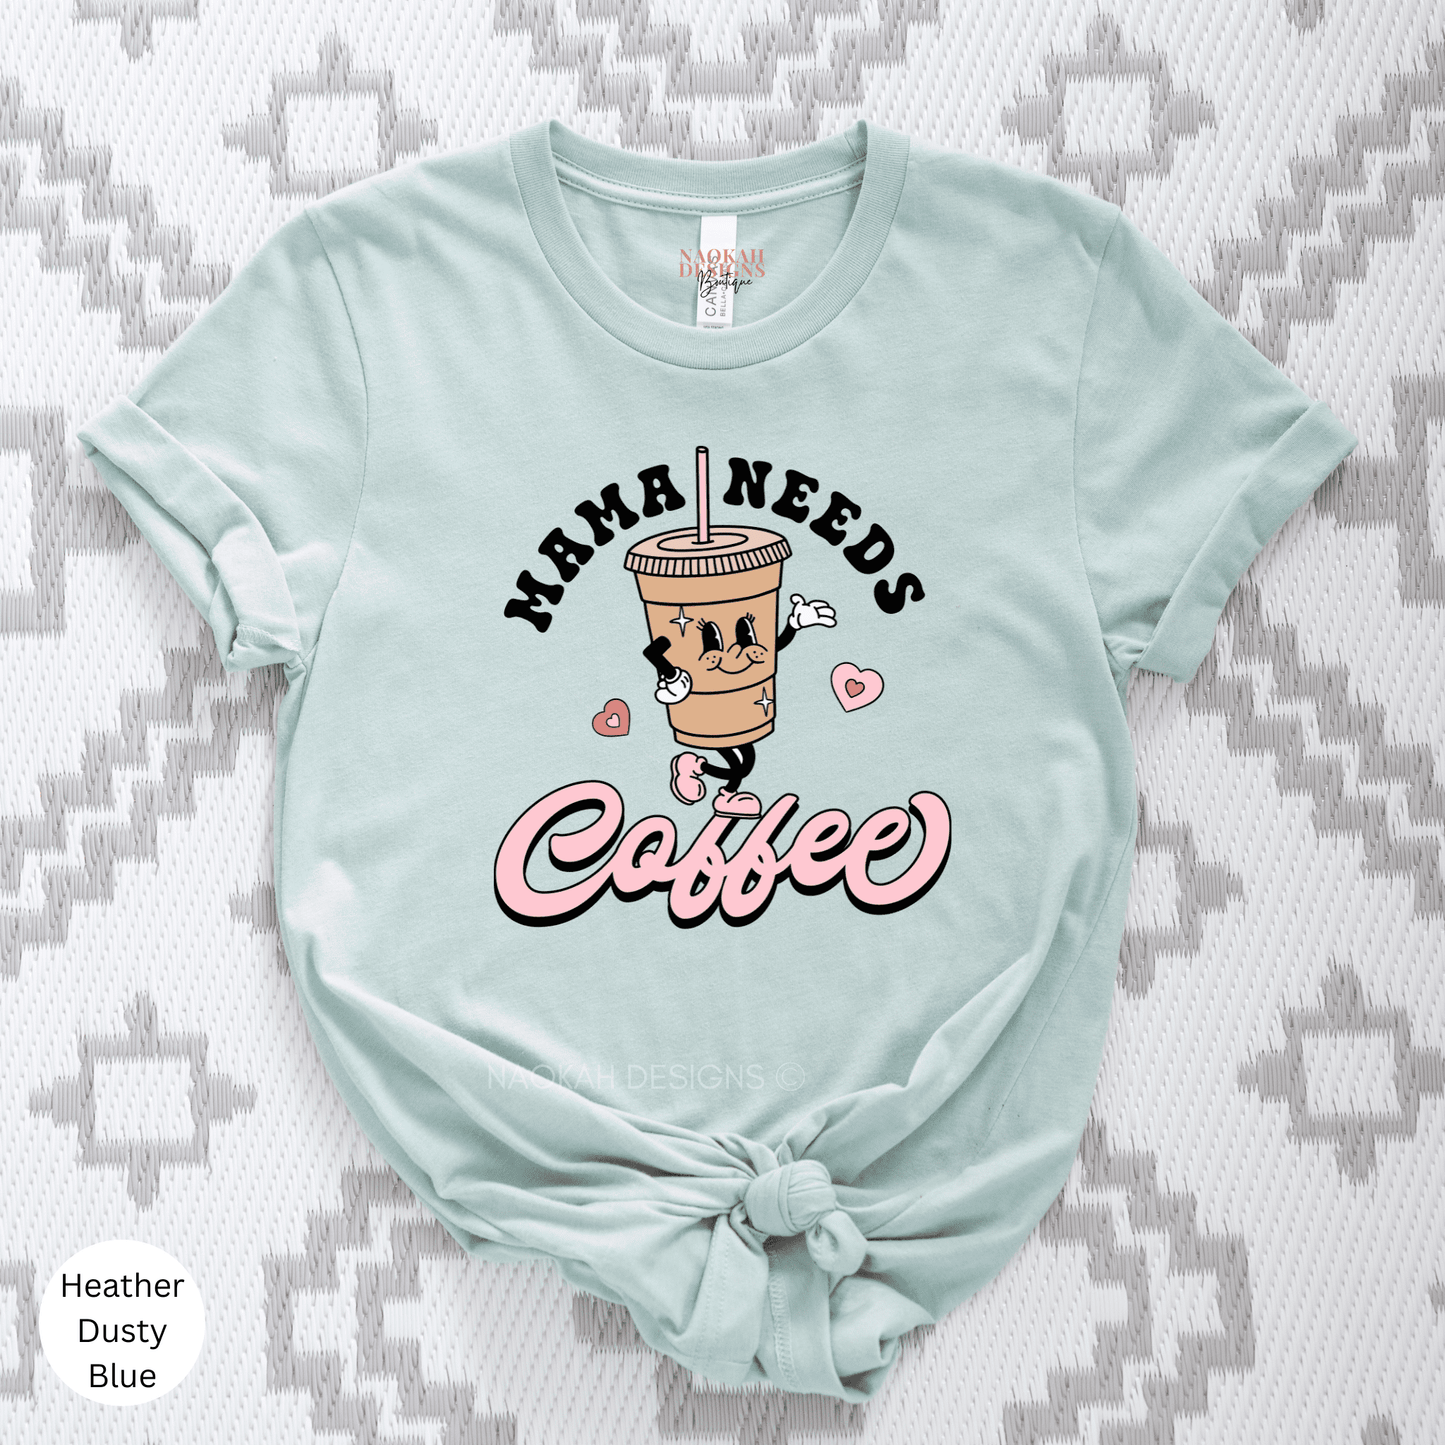 mama needs coffee shirt, tired as a mother, mom shirt, mama t-shirt, coffee lovers gift, valentine gifts for mom, valentine gift shirt, retro coffee shirt, retro mom coffee shirt